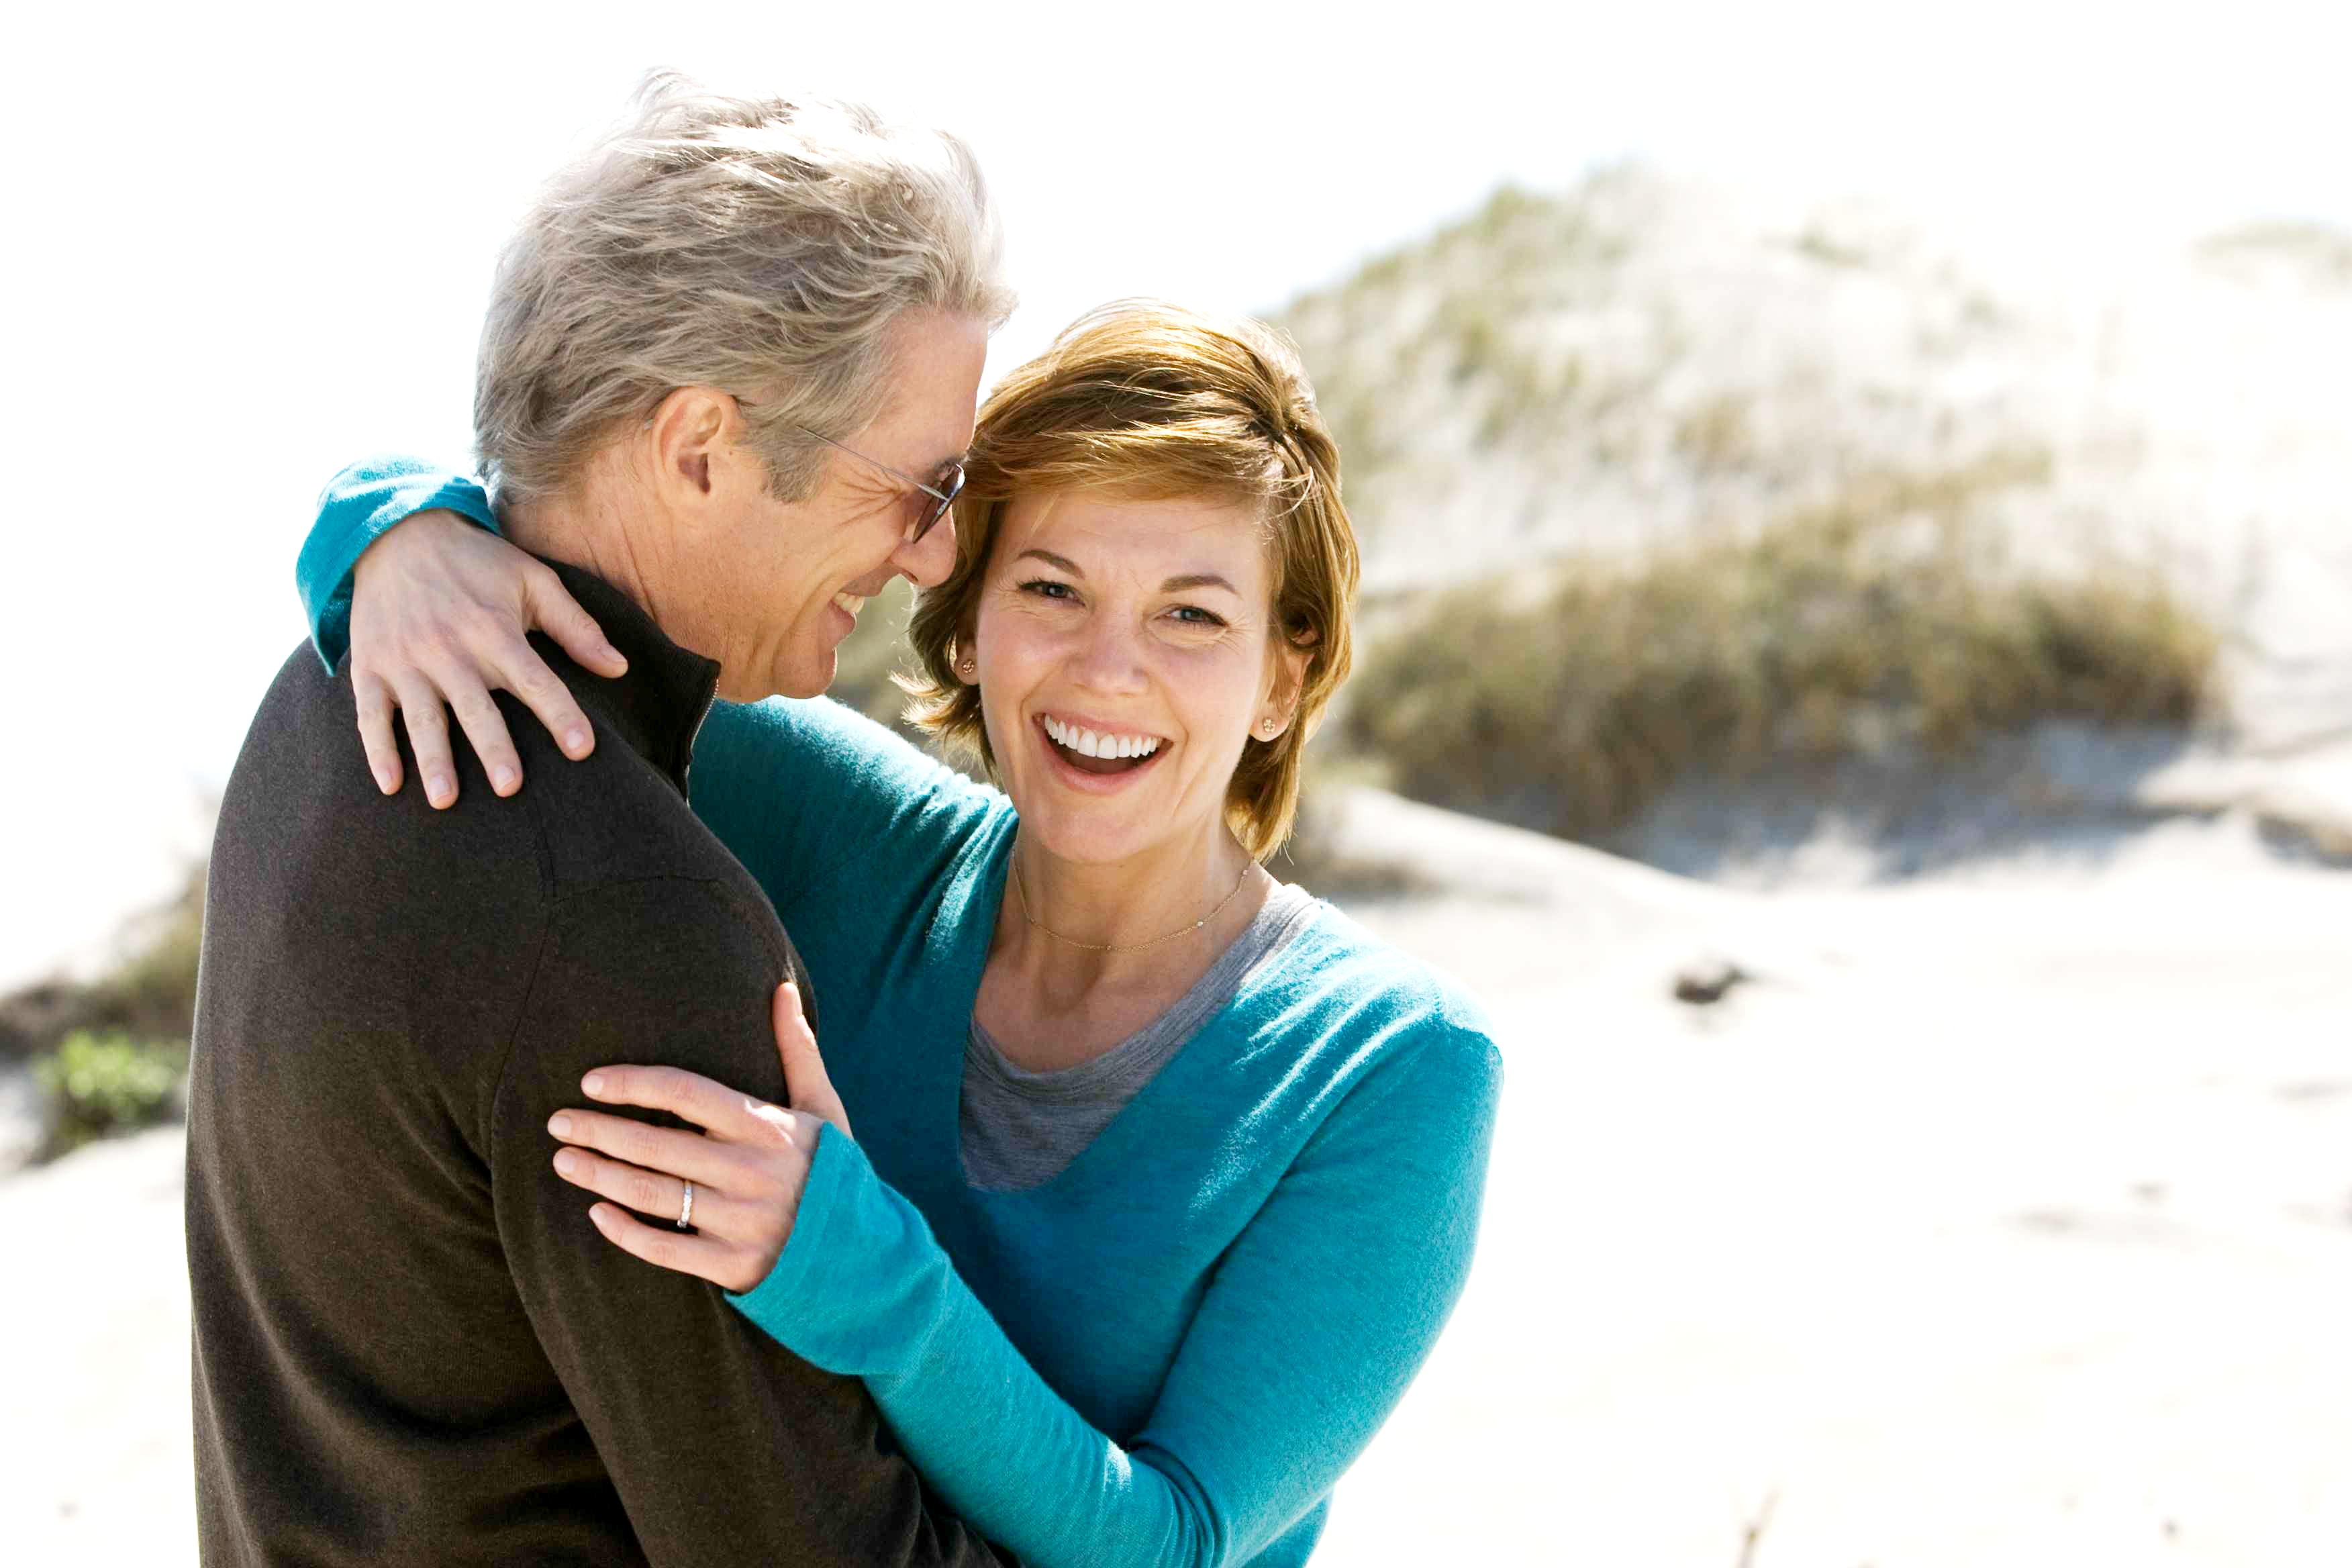 Richard Gere stars as Dr. Paul Flanner and Diane Lane stars as Adrienne Willis in Warner Bros. Pictures' Nights in Rodanthe (2008). Photo credit by Michael Tackett.